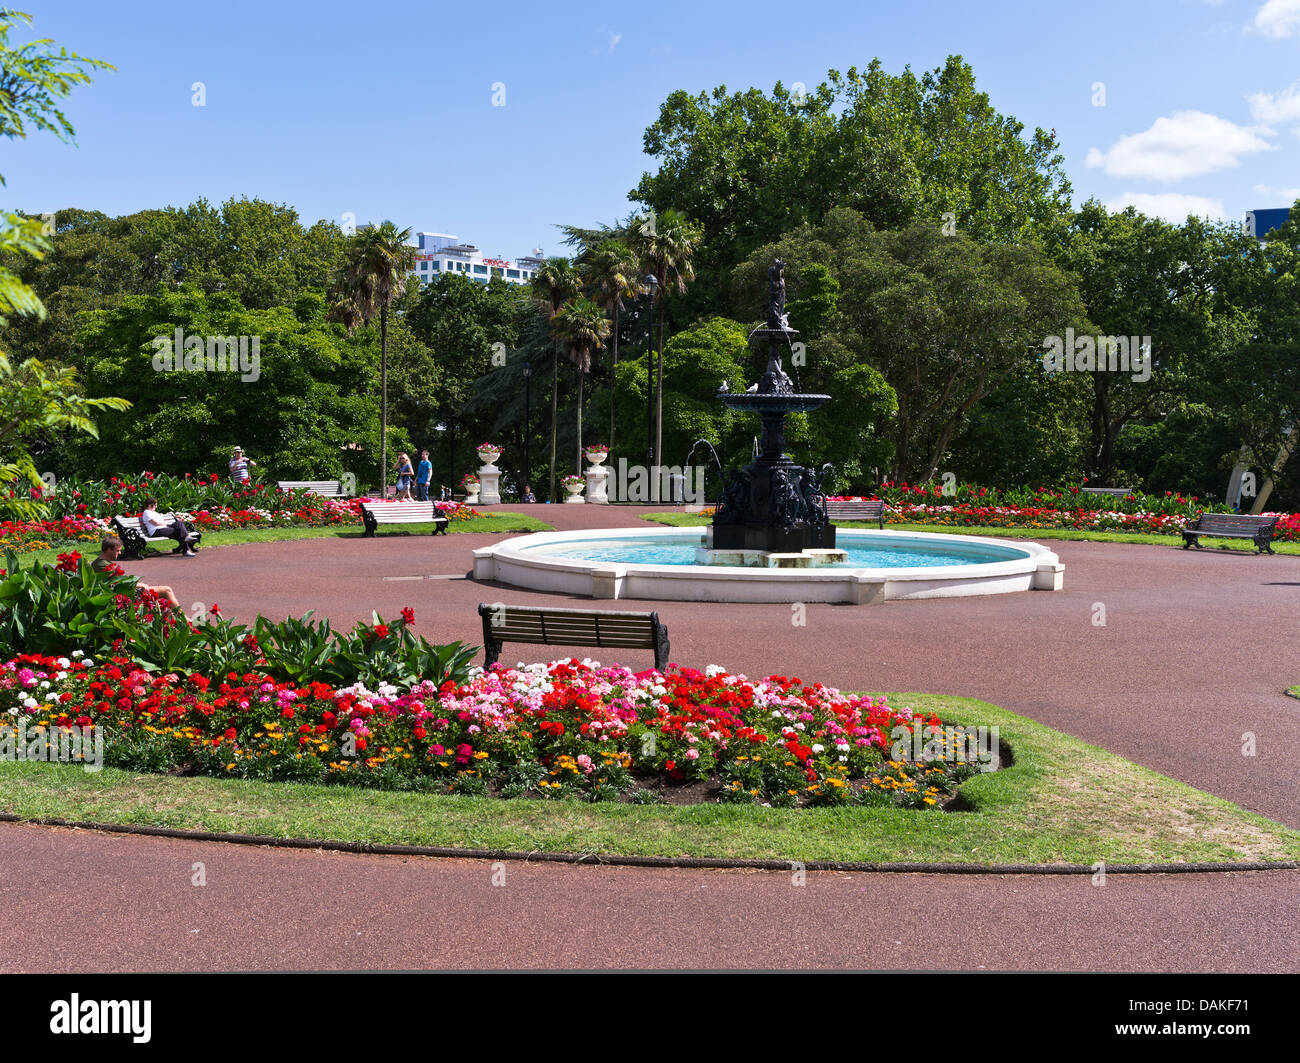 dh Albert Park AUCKLAND NEW ZEALAND People sitting bench relaxing fountain pool flower garden parks city Stock Photo